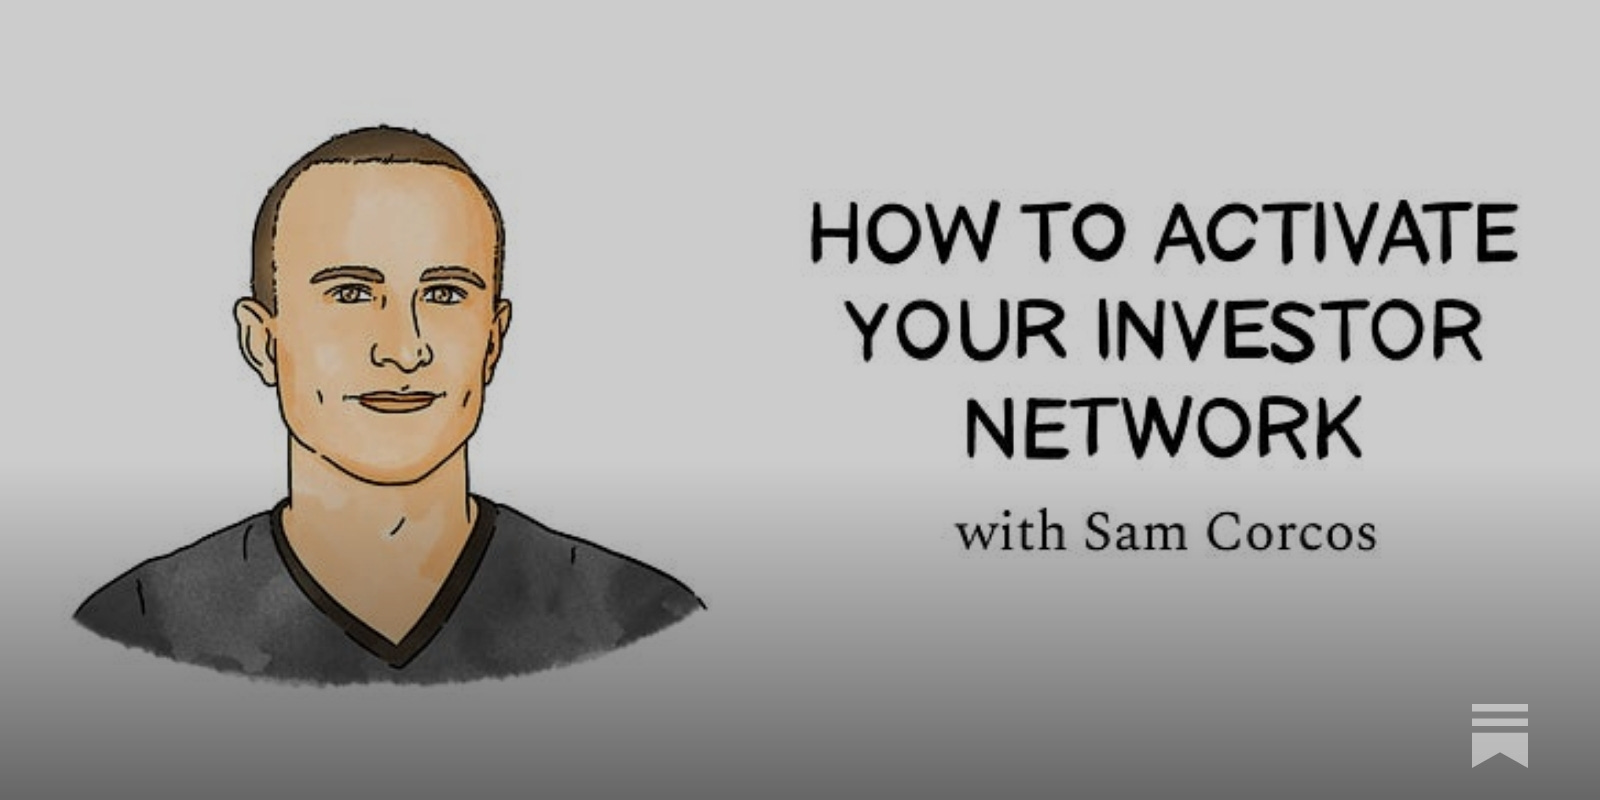 How to activate your investor network